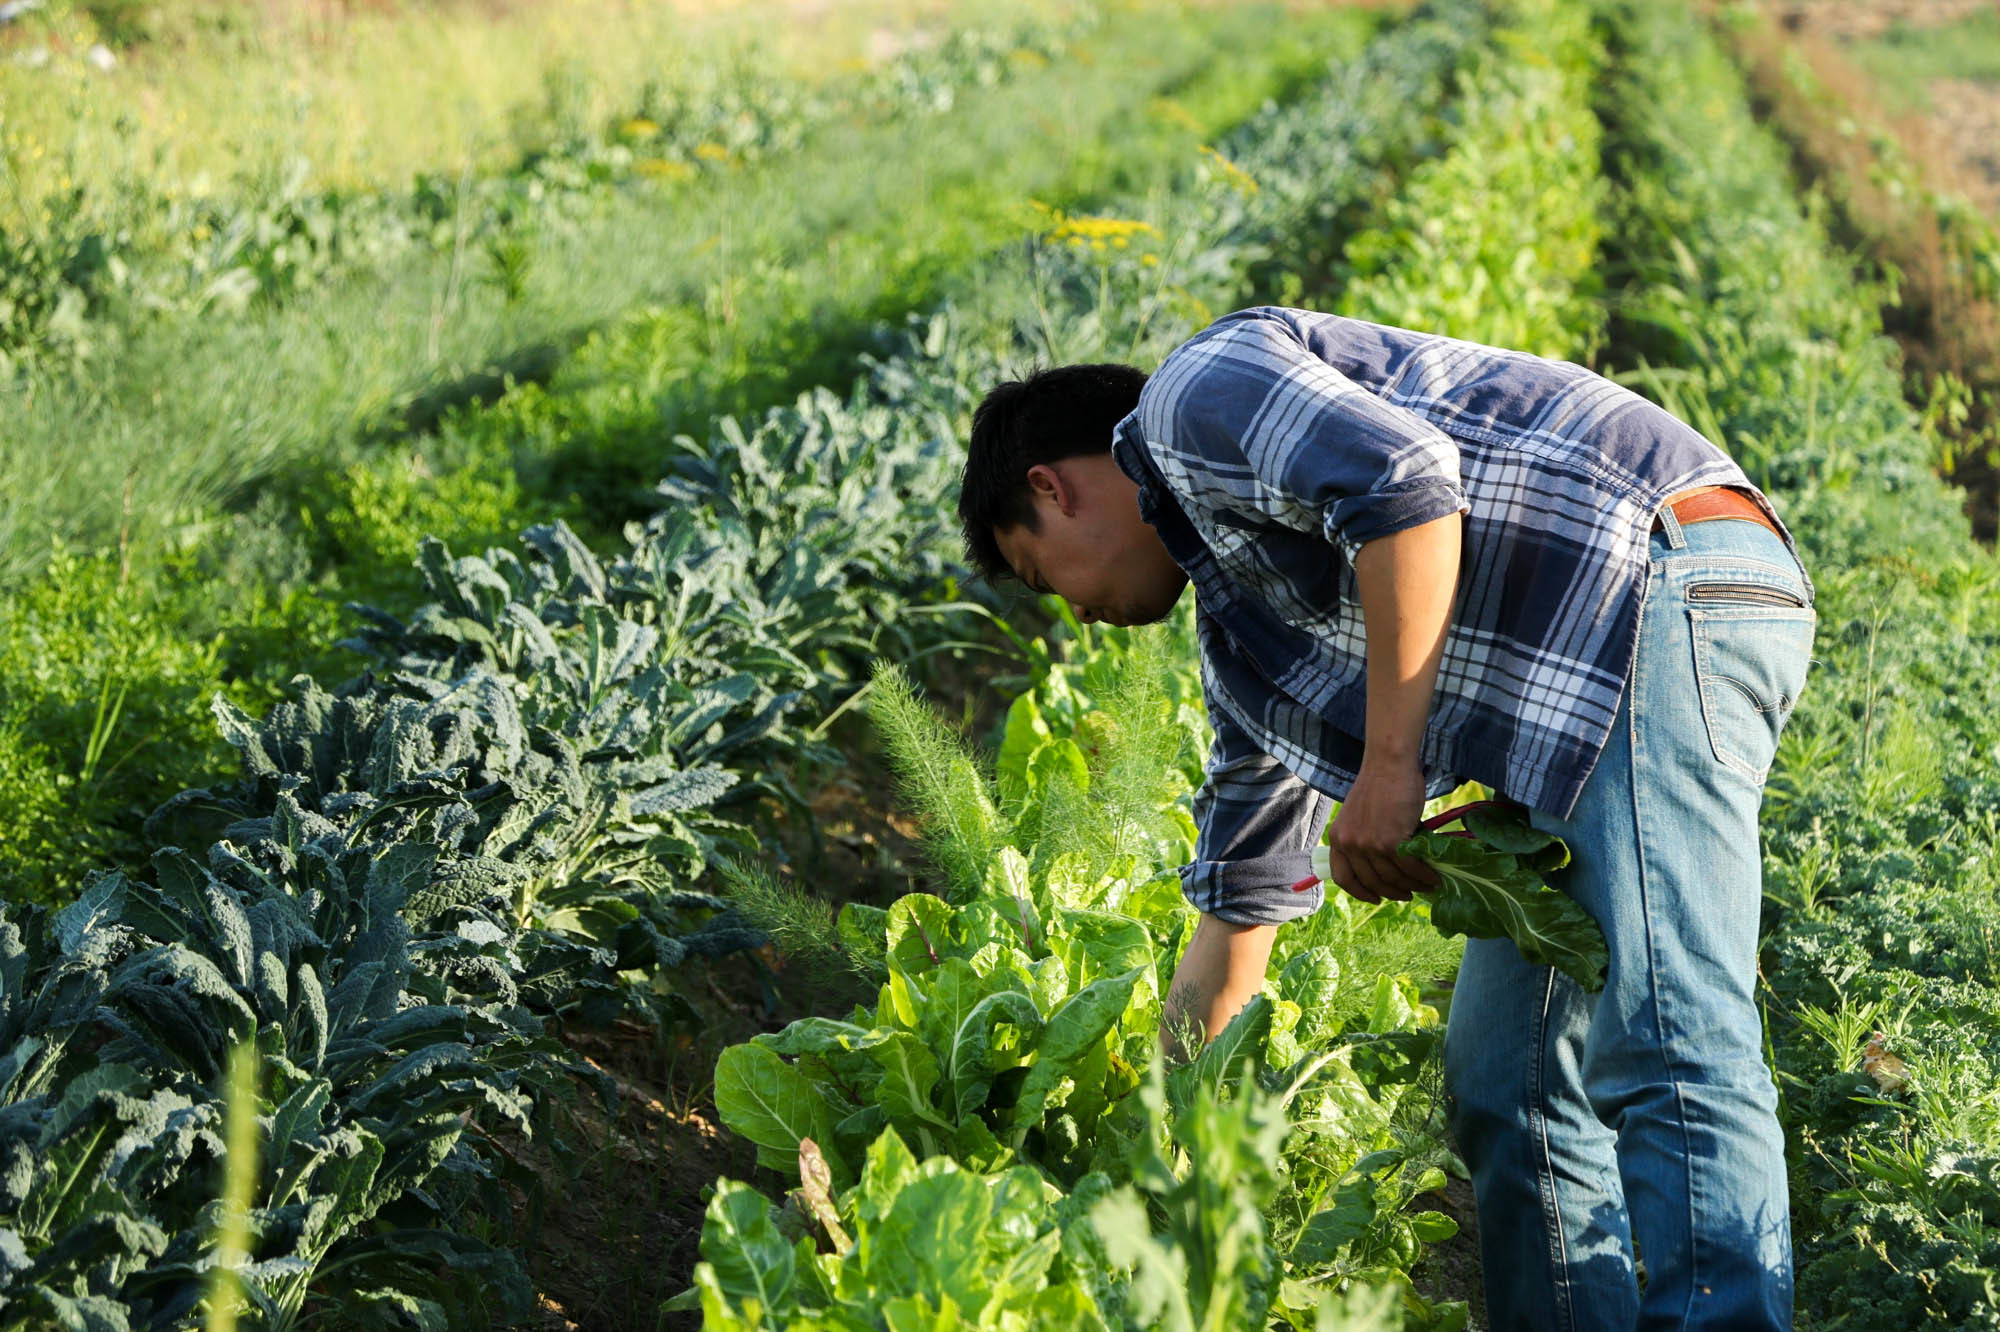 A farmer checks on produce at Padao Farms, a 15-acre plot run by the Yang family in Fresno, Calif., that specializes in Asian greens.A farmer checks on produce at Padao Farms, a 15-acre plot run by the Yang family in Fresno, Calif., that specializes in Asian greens.